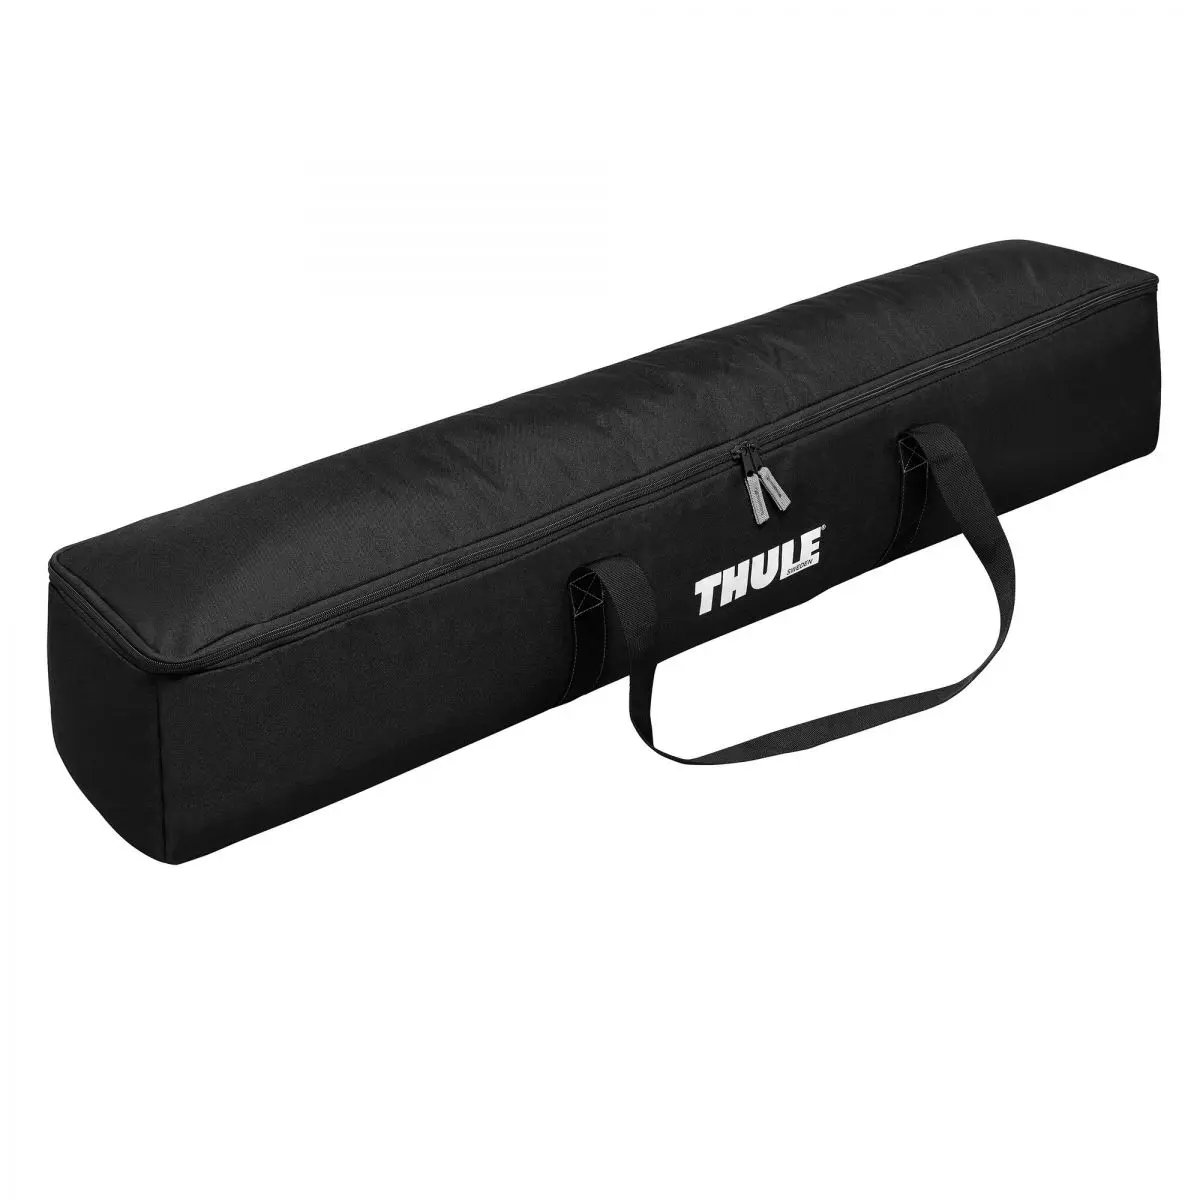 Thule Panorama pentru TO 5200, lungime 3,5 m, inaltime L